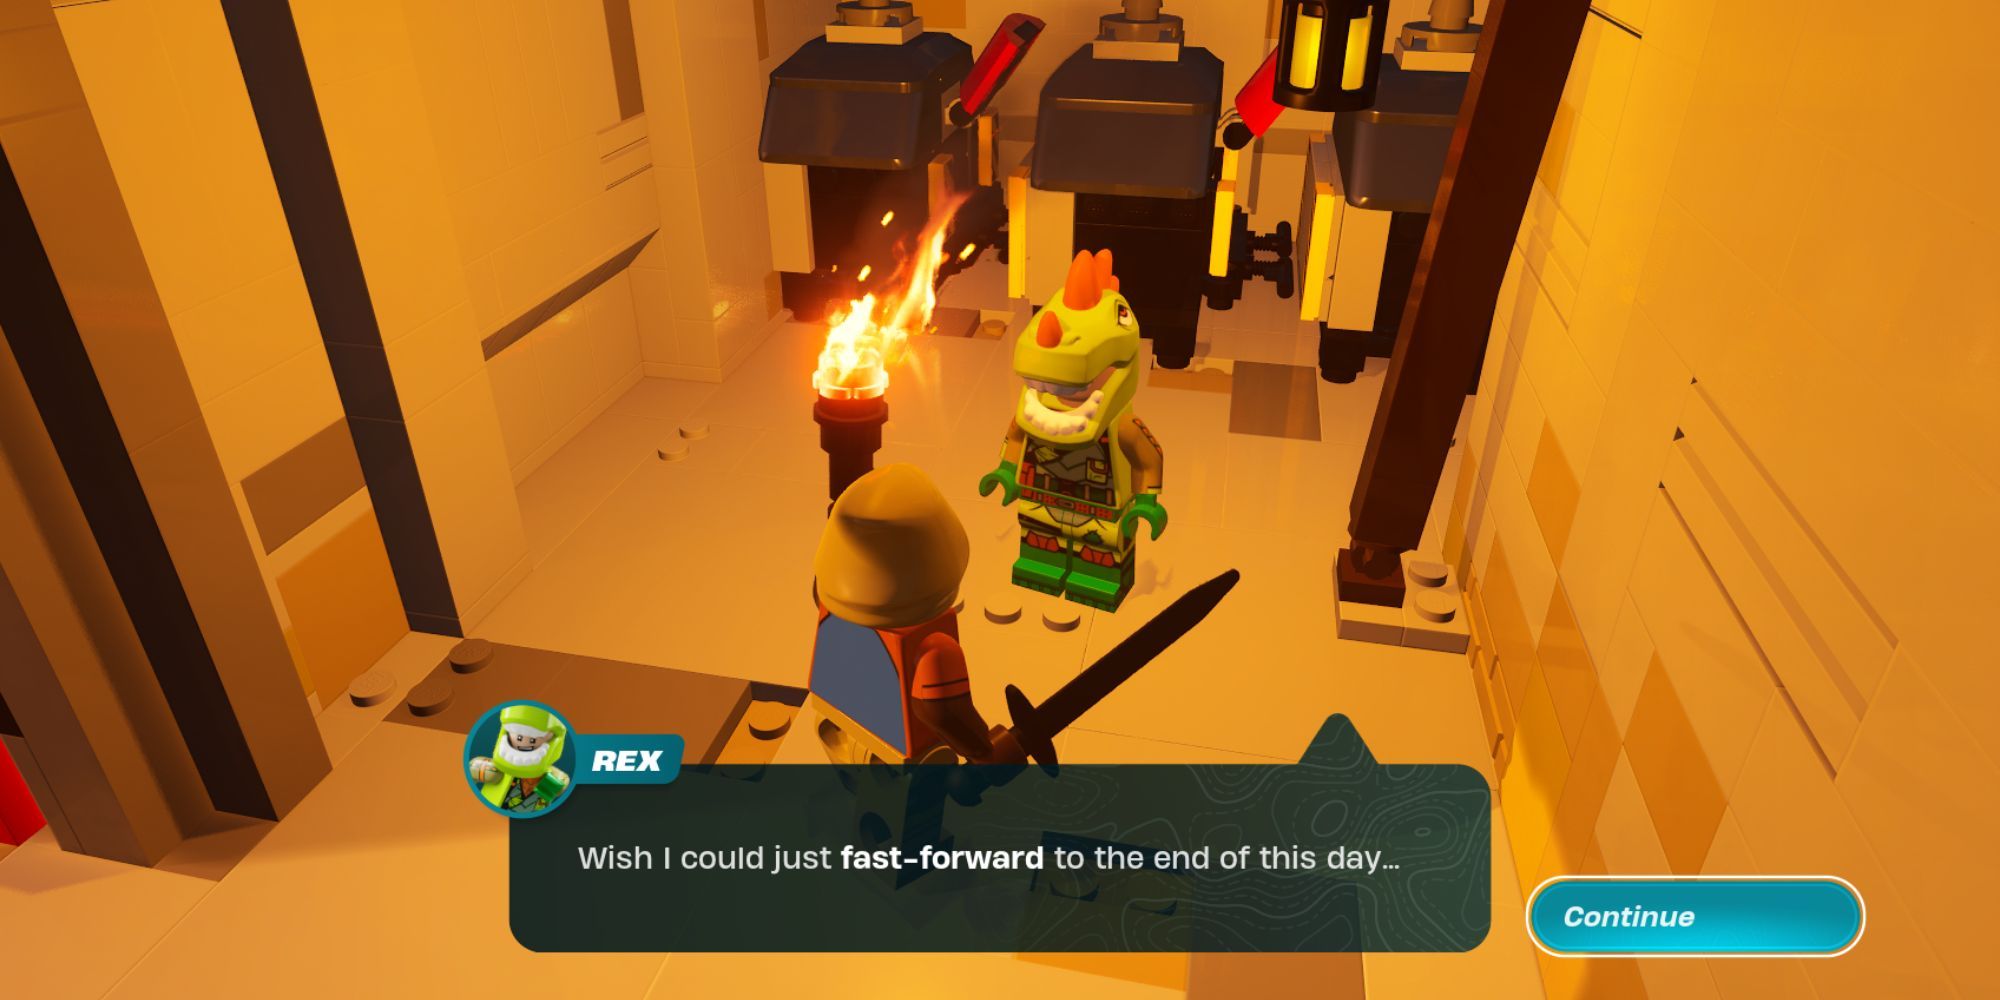 A dialogue with Rex, a man wearing a greenish-yellow dinosaur helmet with orange spikes and white teeth.